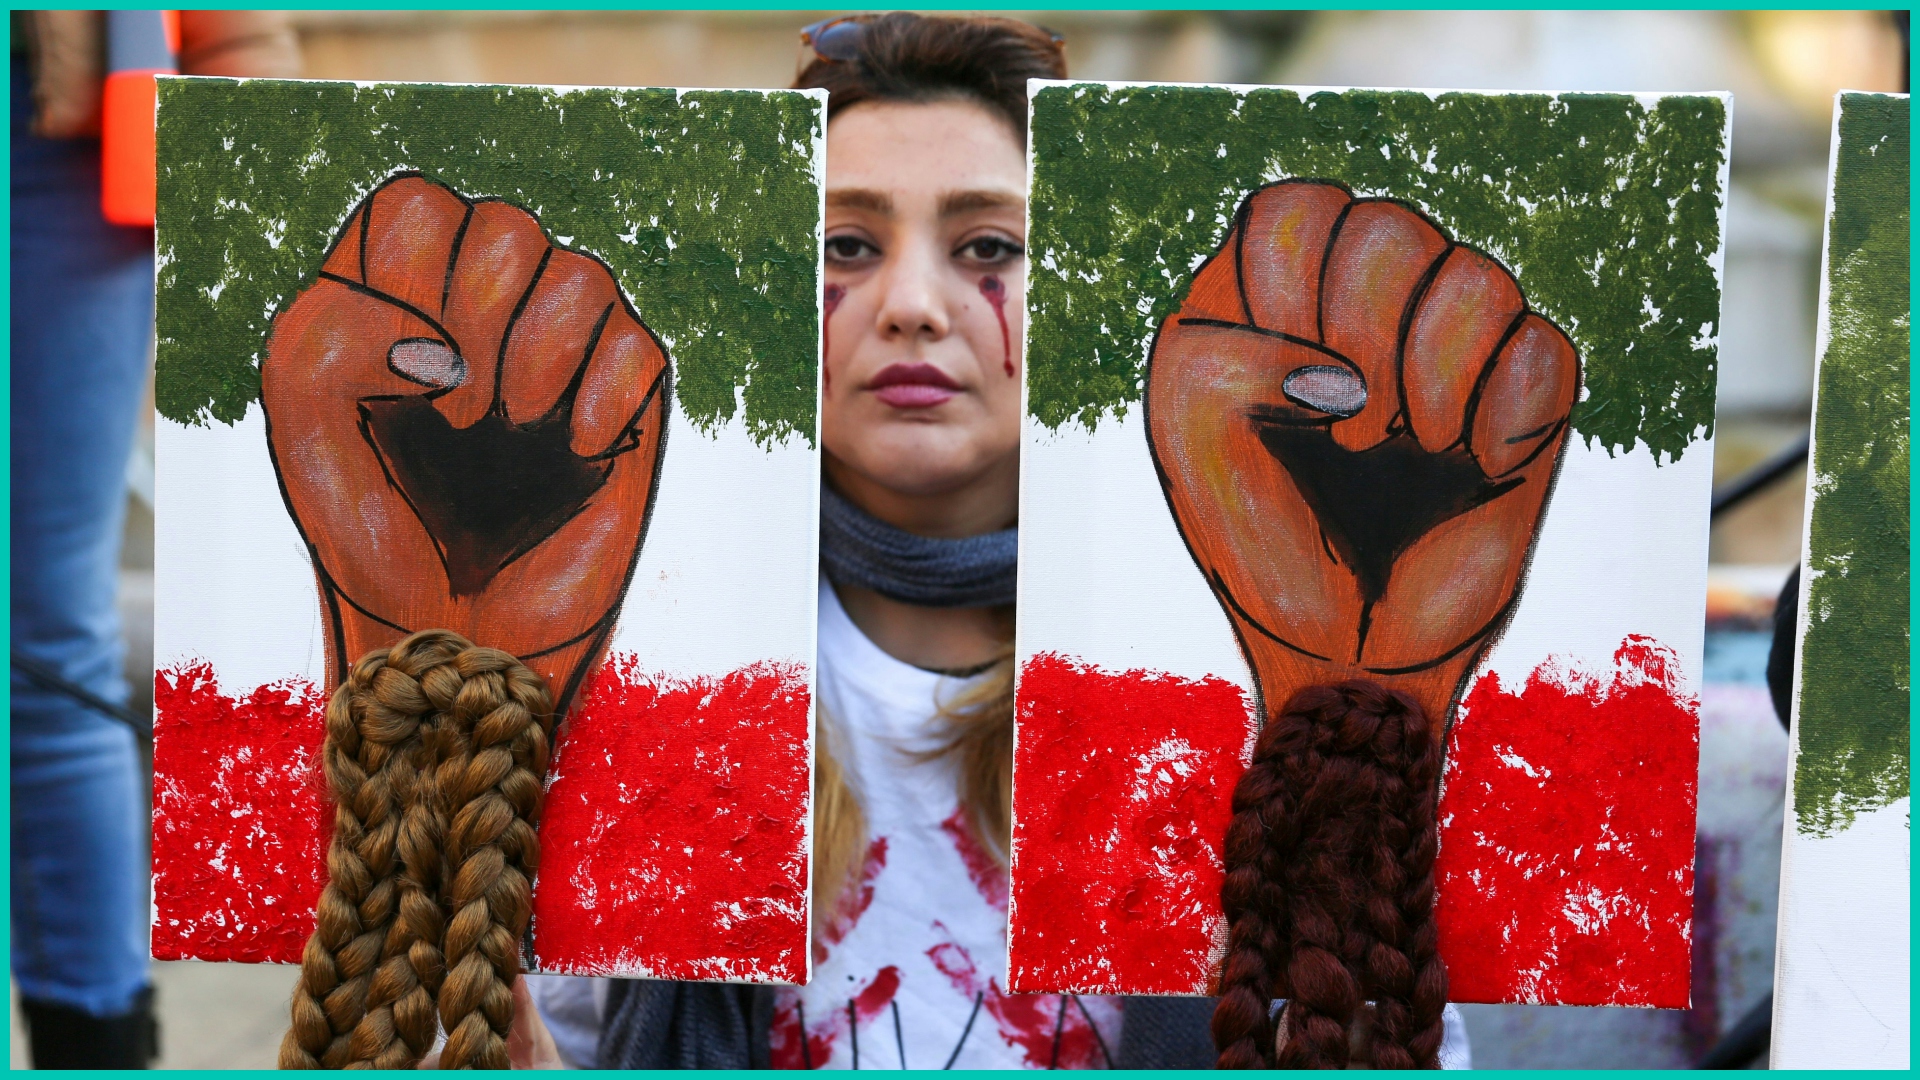 A woman during an Iranian protest